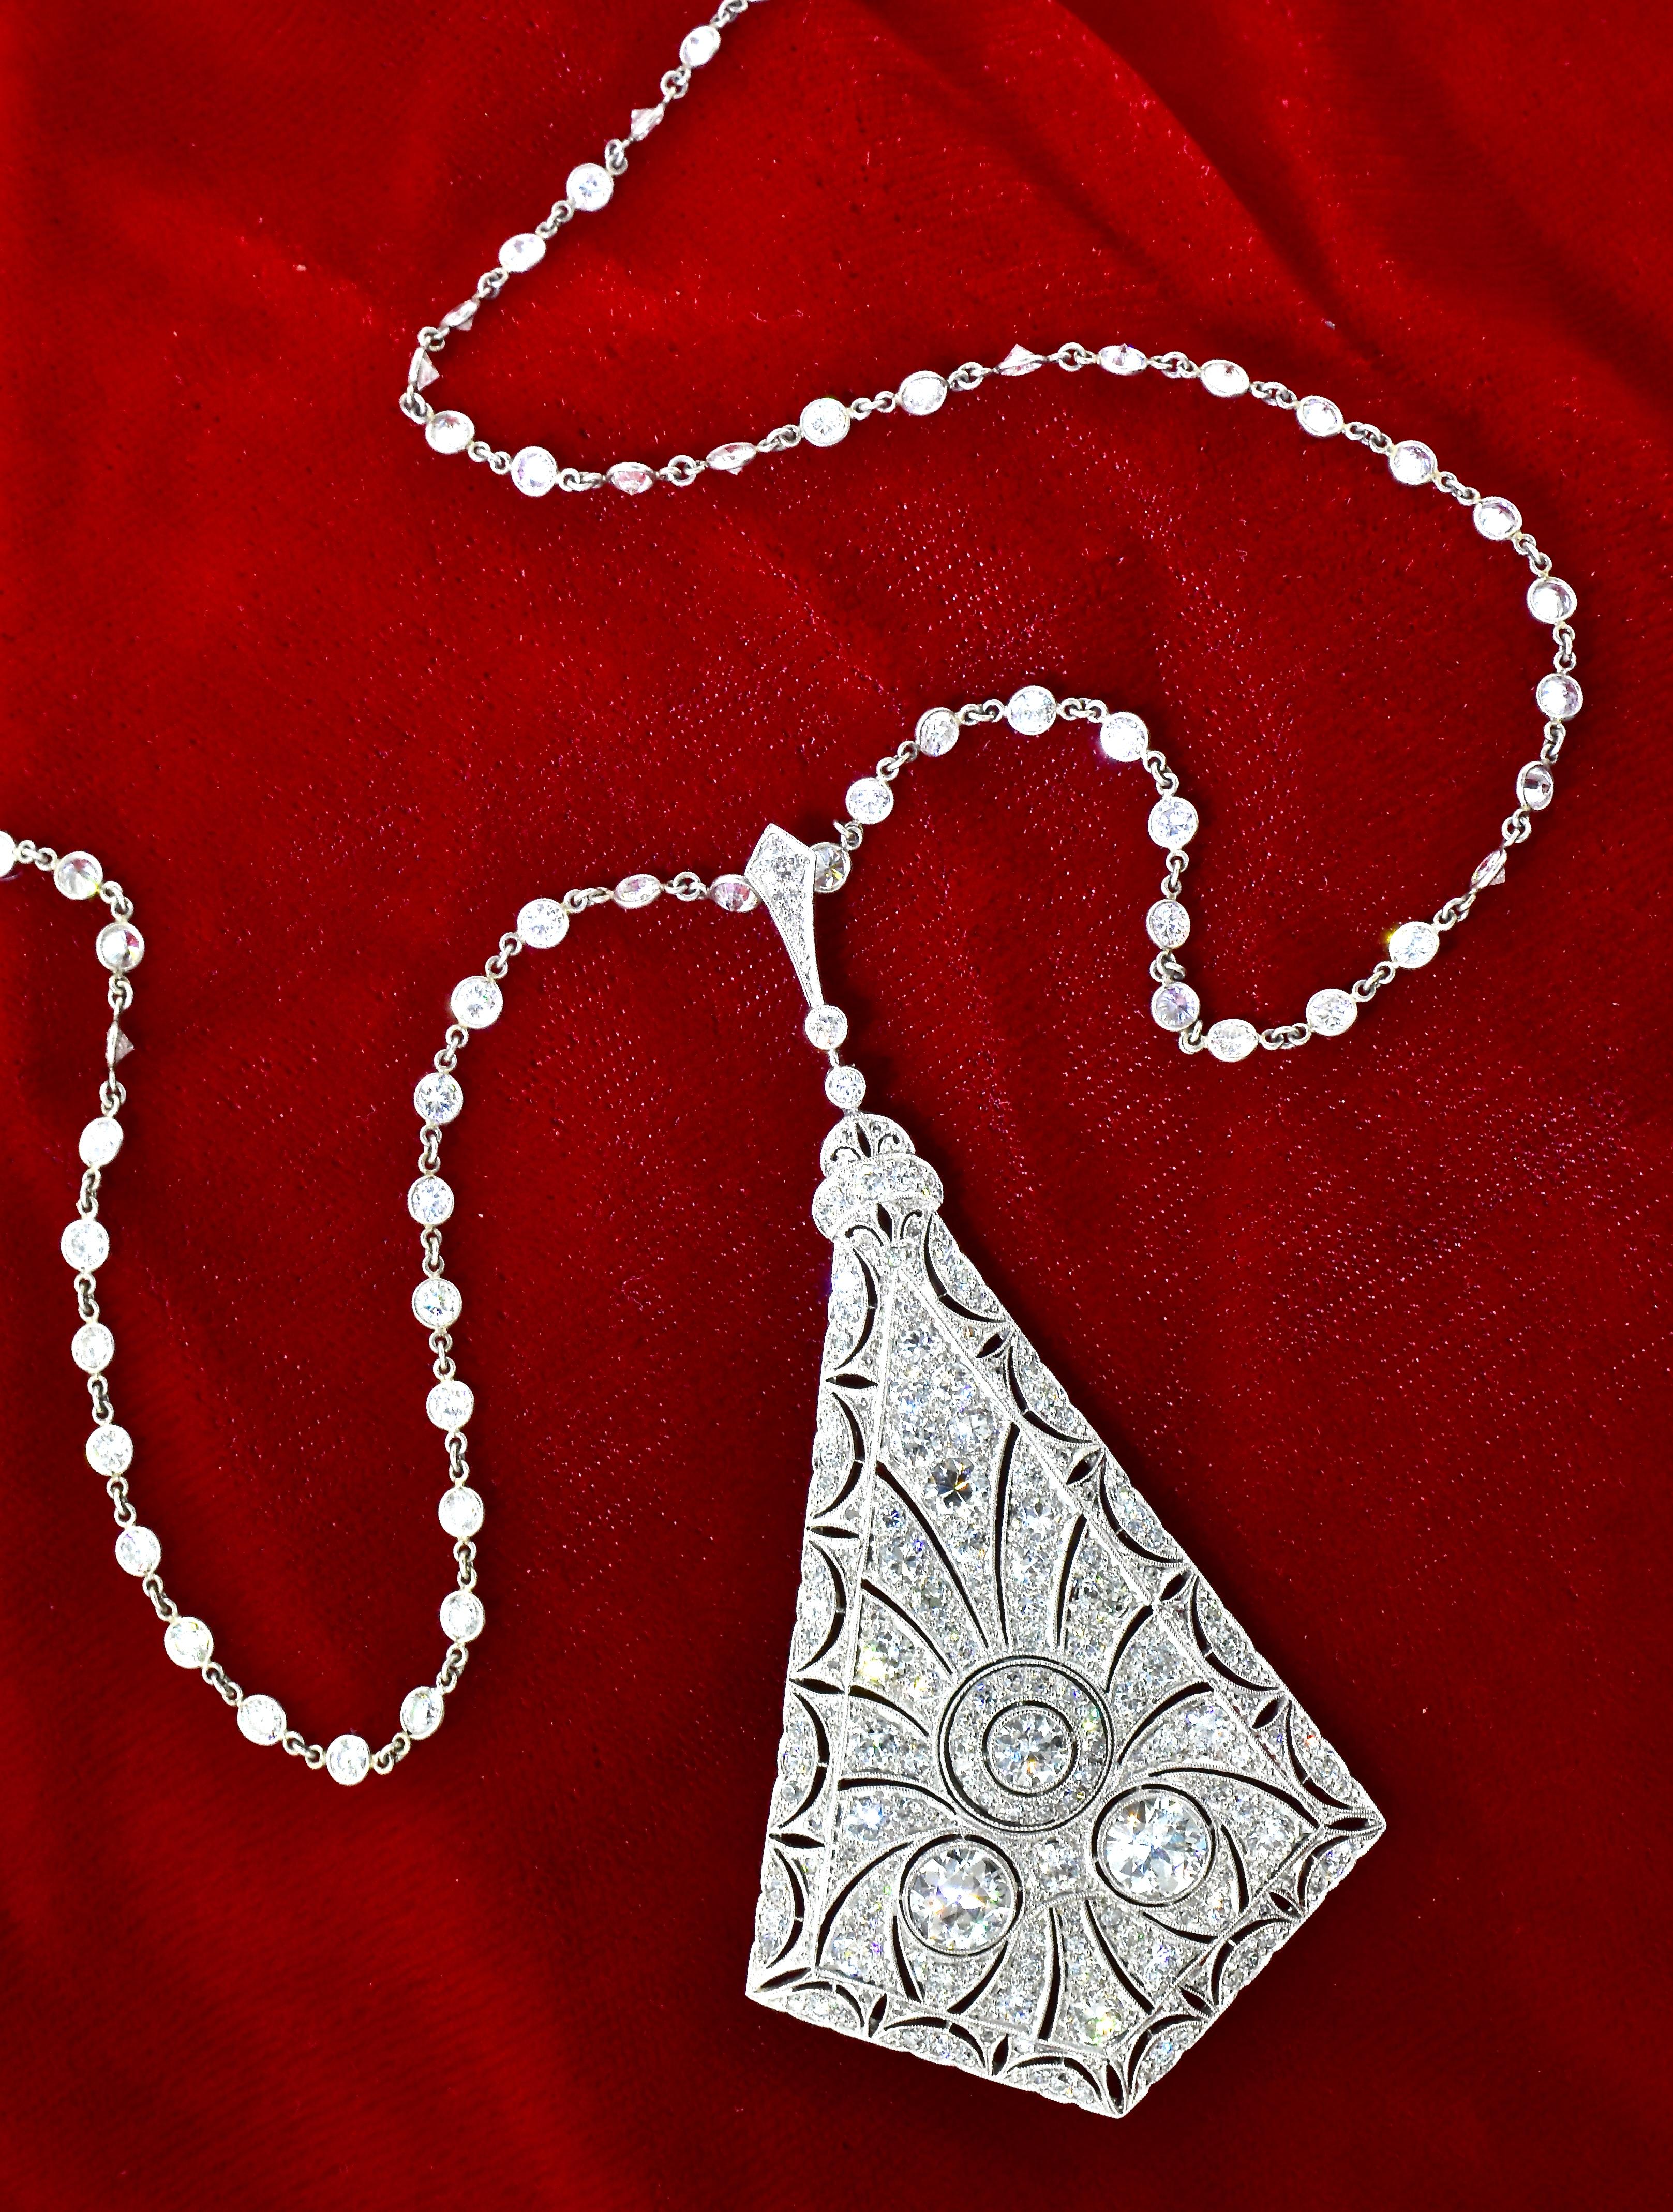 Antique diamond pendant necklace from the early Edwardian era.  159 finely matched old European cut diamonds are set in platinum.  These white diamonds are estimated to be near colorless (H/I) and very slightly included (VS) and weigh a total of